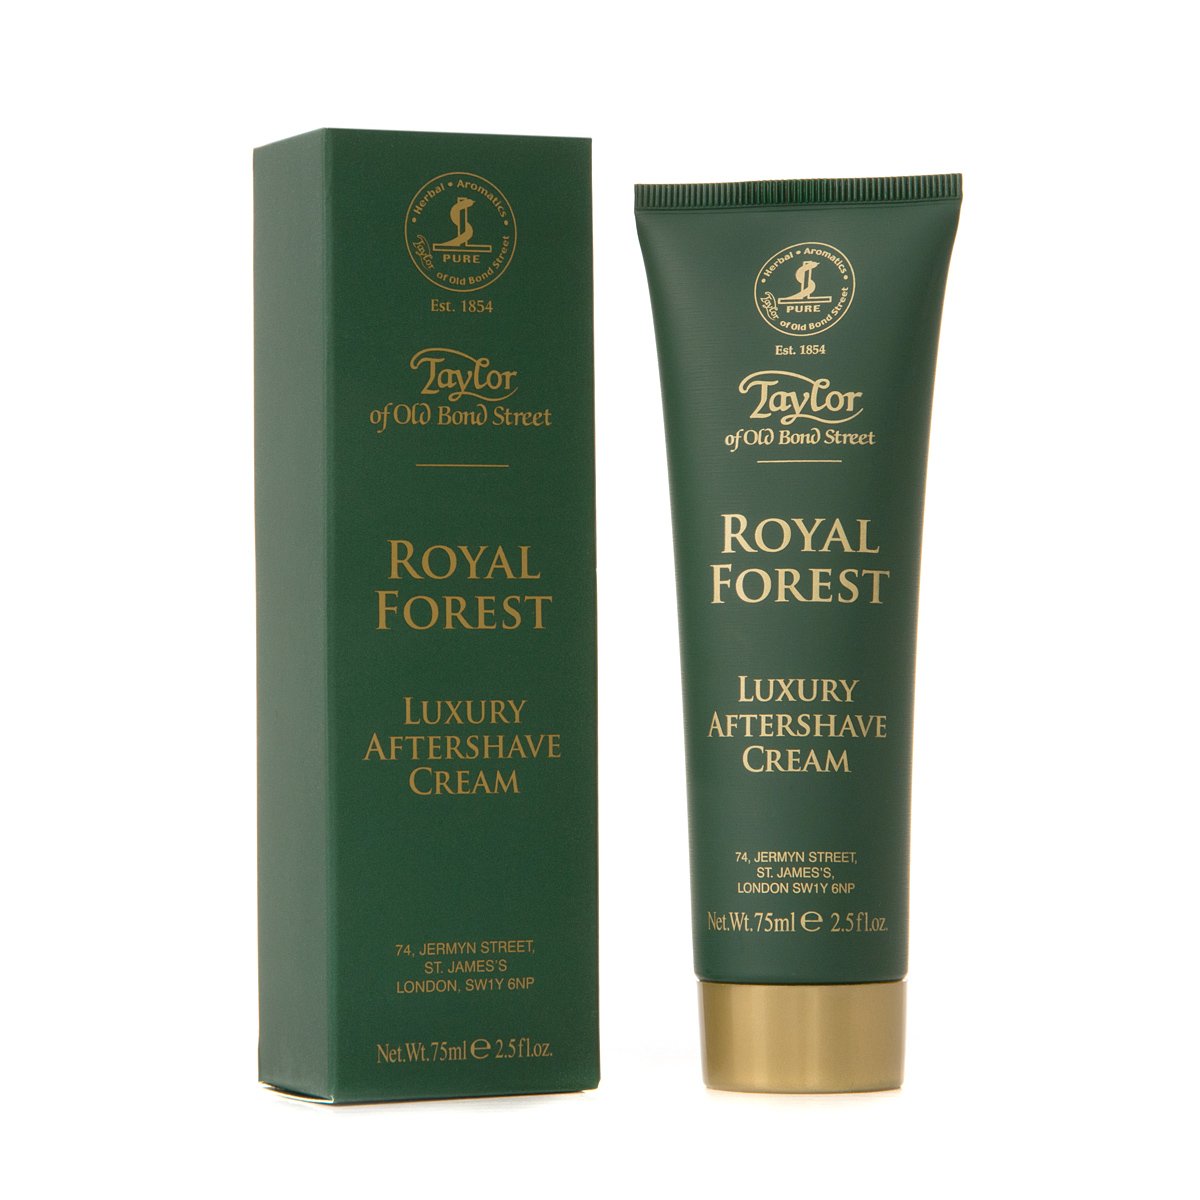 Royal Forest Aftershave Cream 75ml